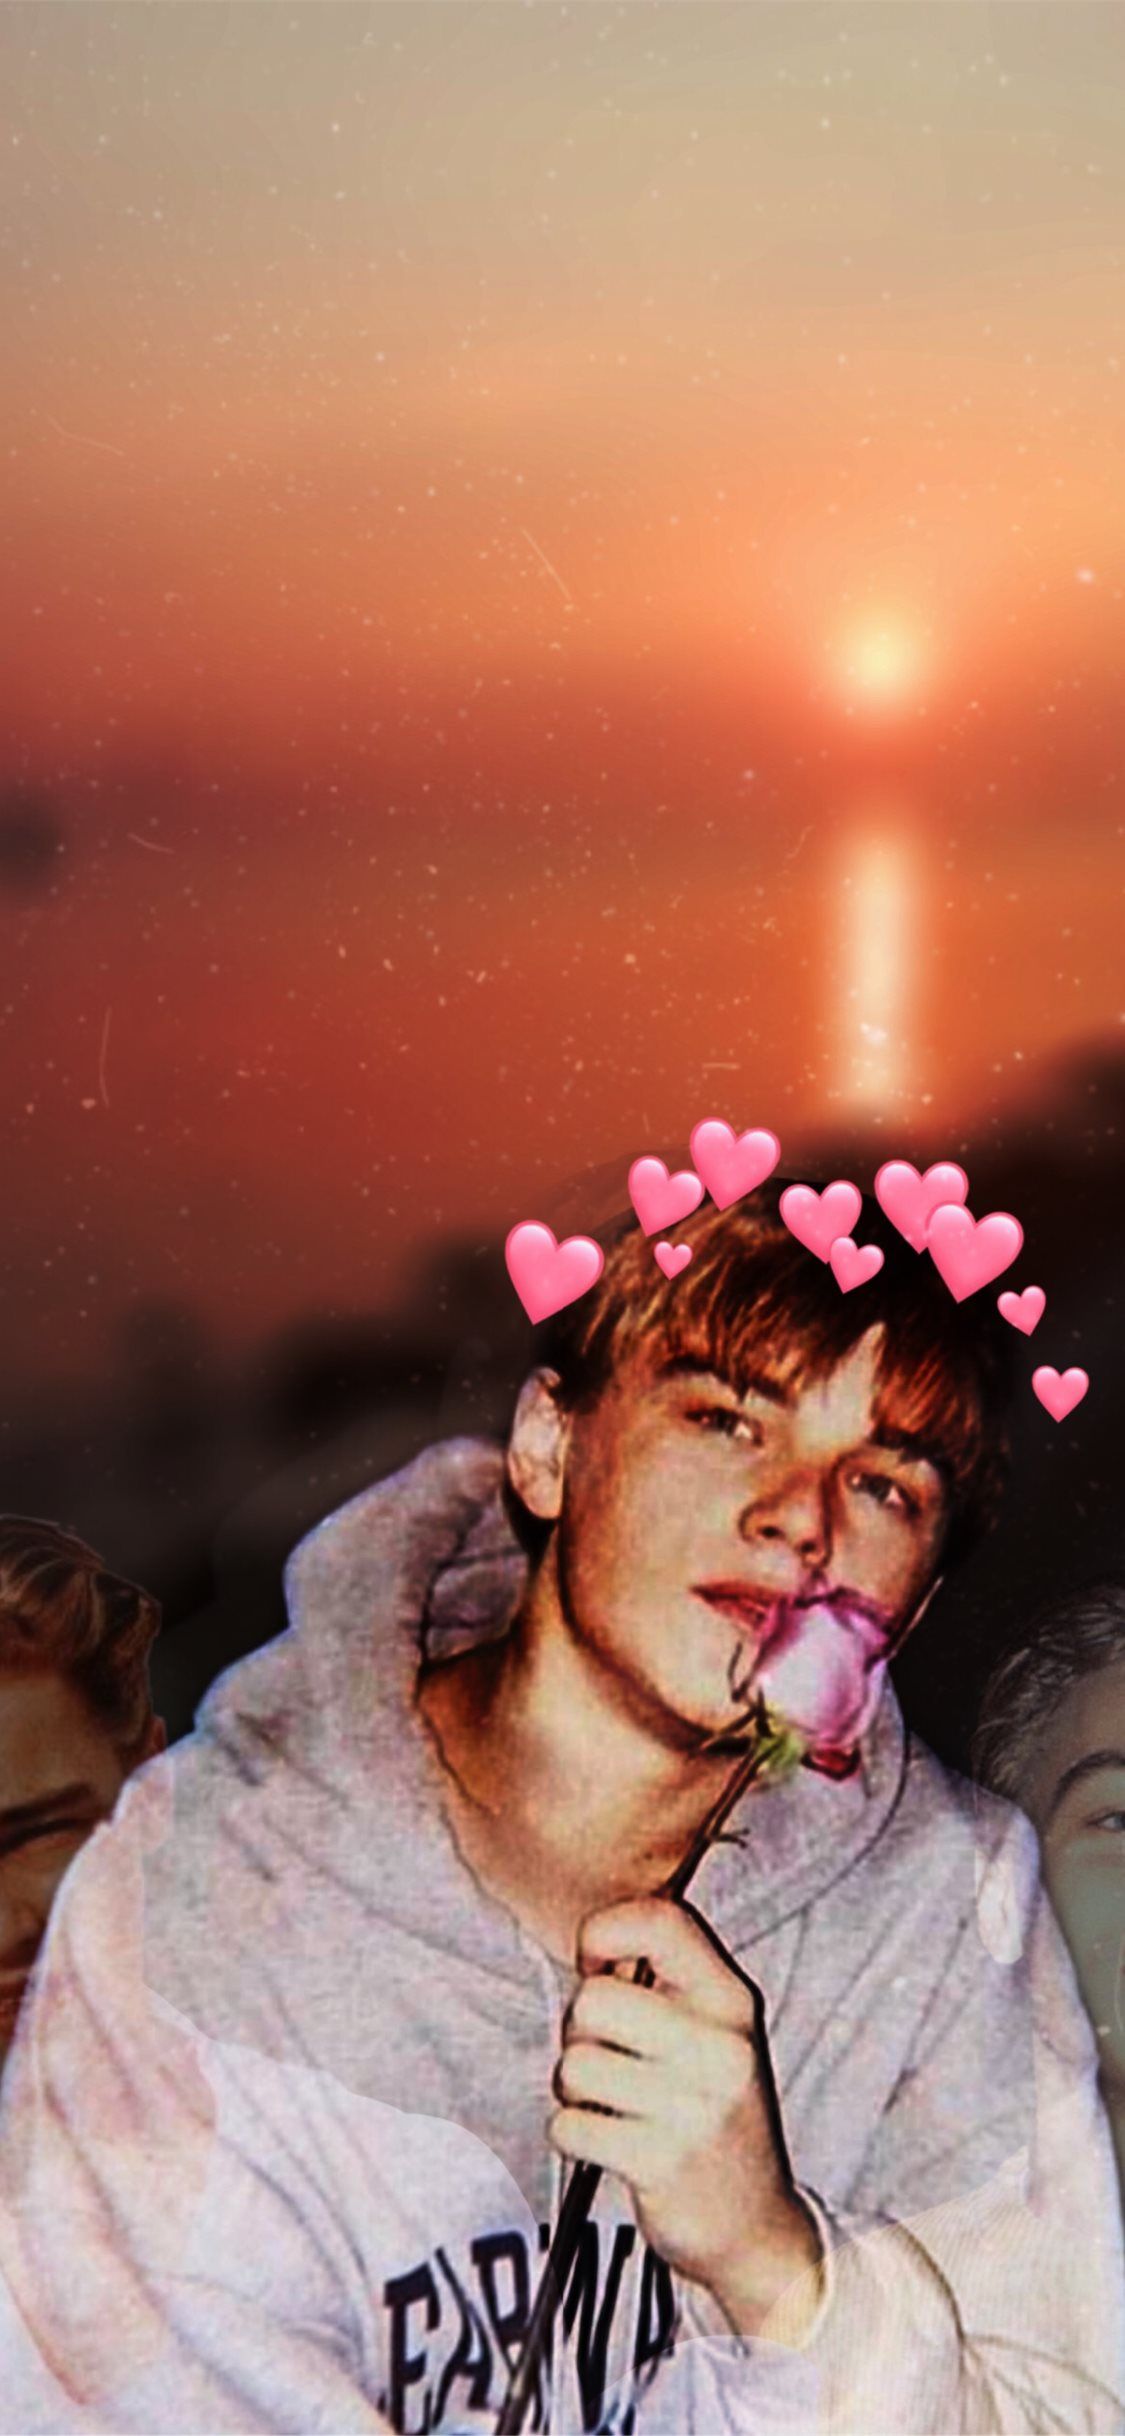 Aesthetic edit of Harry Potter character holding a rose with hearts around his head - Leonardo DiCaprio